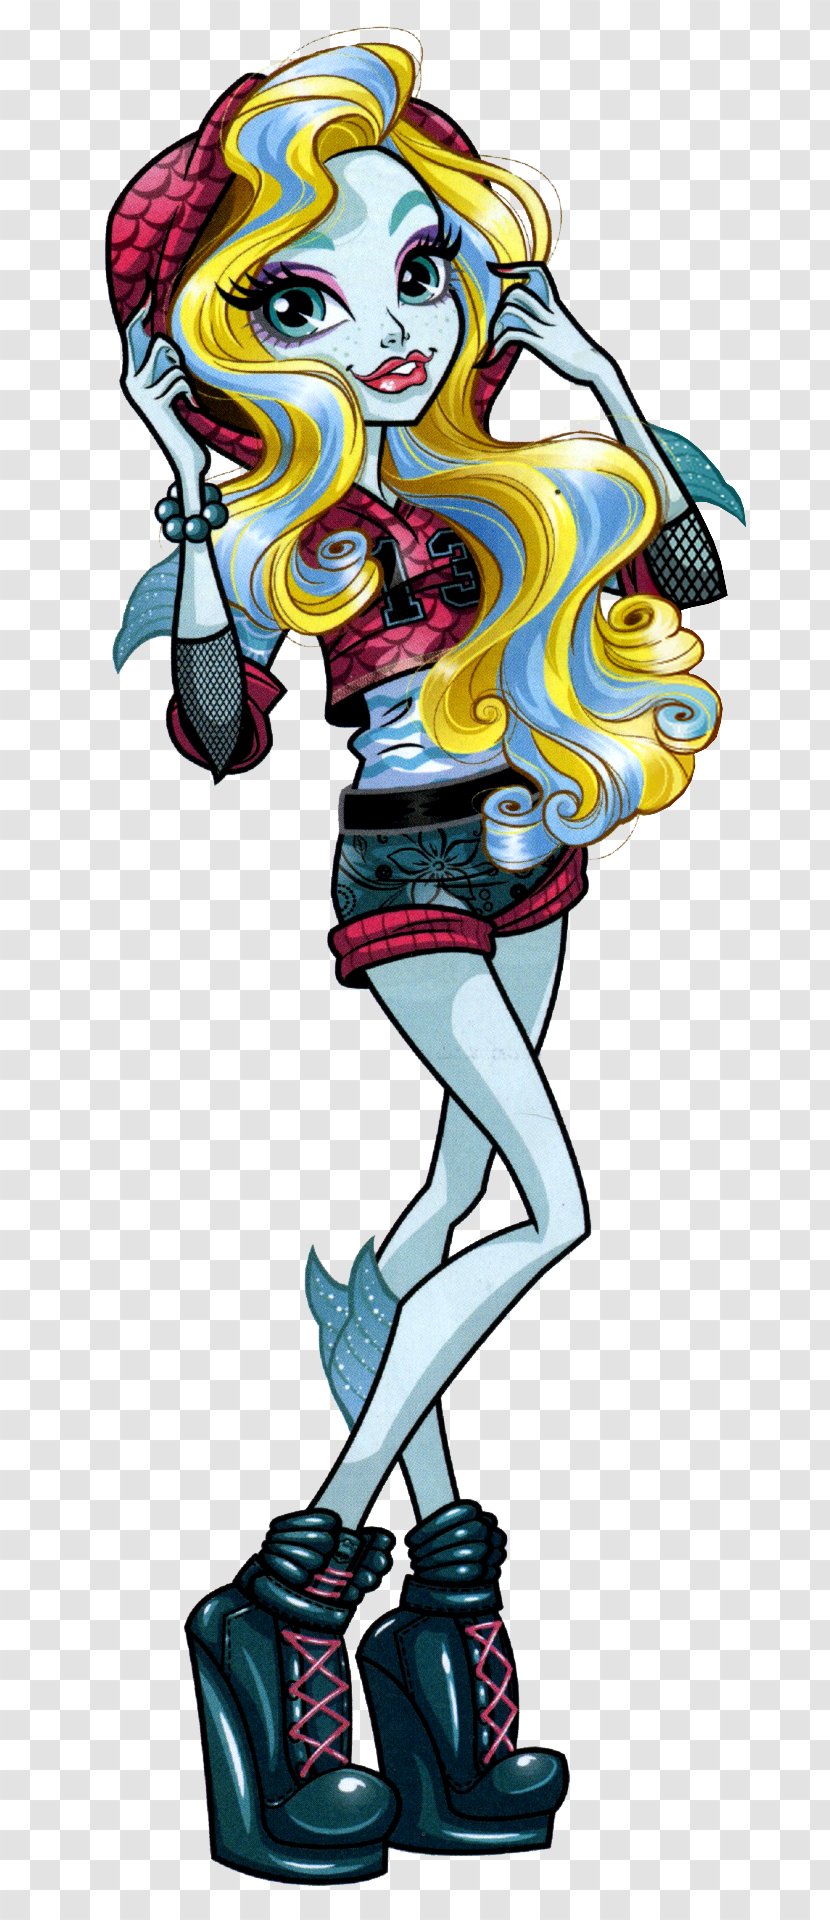 Lagoona Blue Monster High Clawdeen Wolf Frankie Stein Draculaura - Cleo Denile Transparent PNG